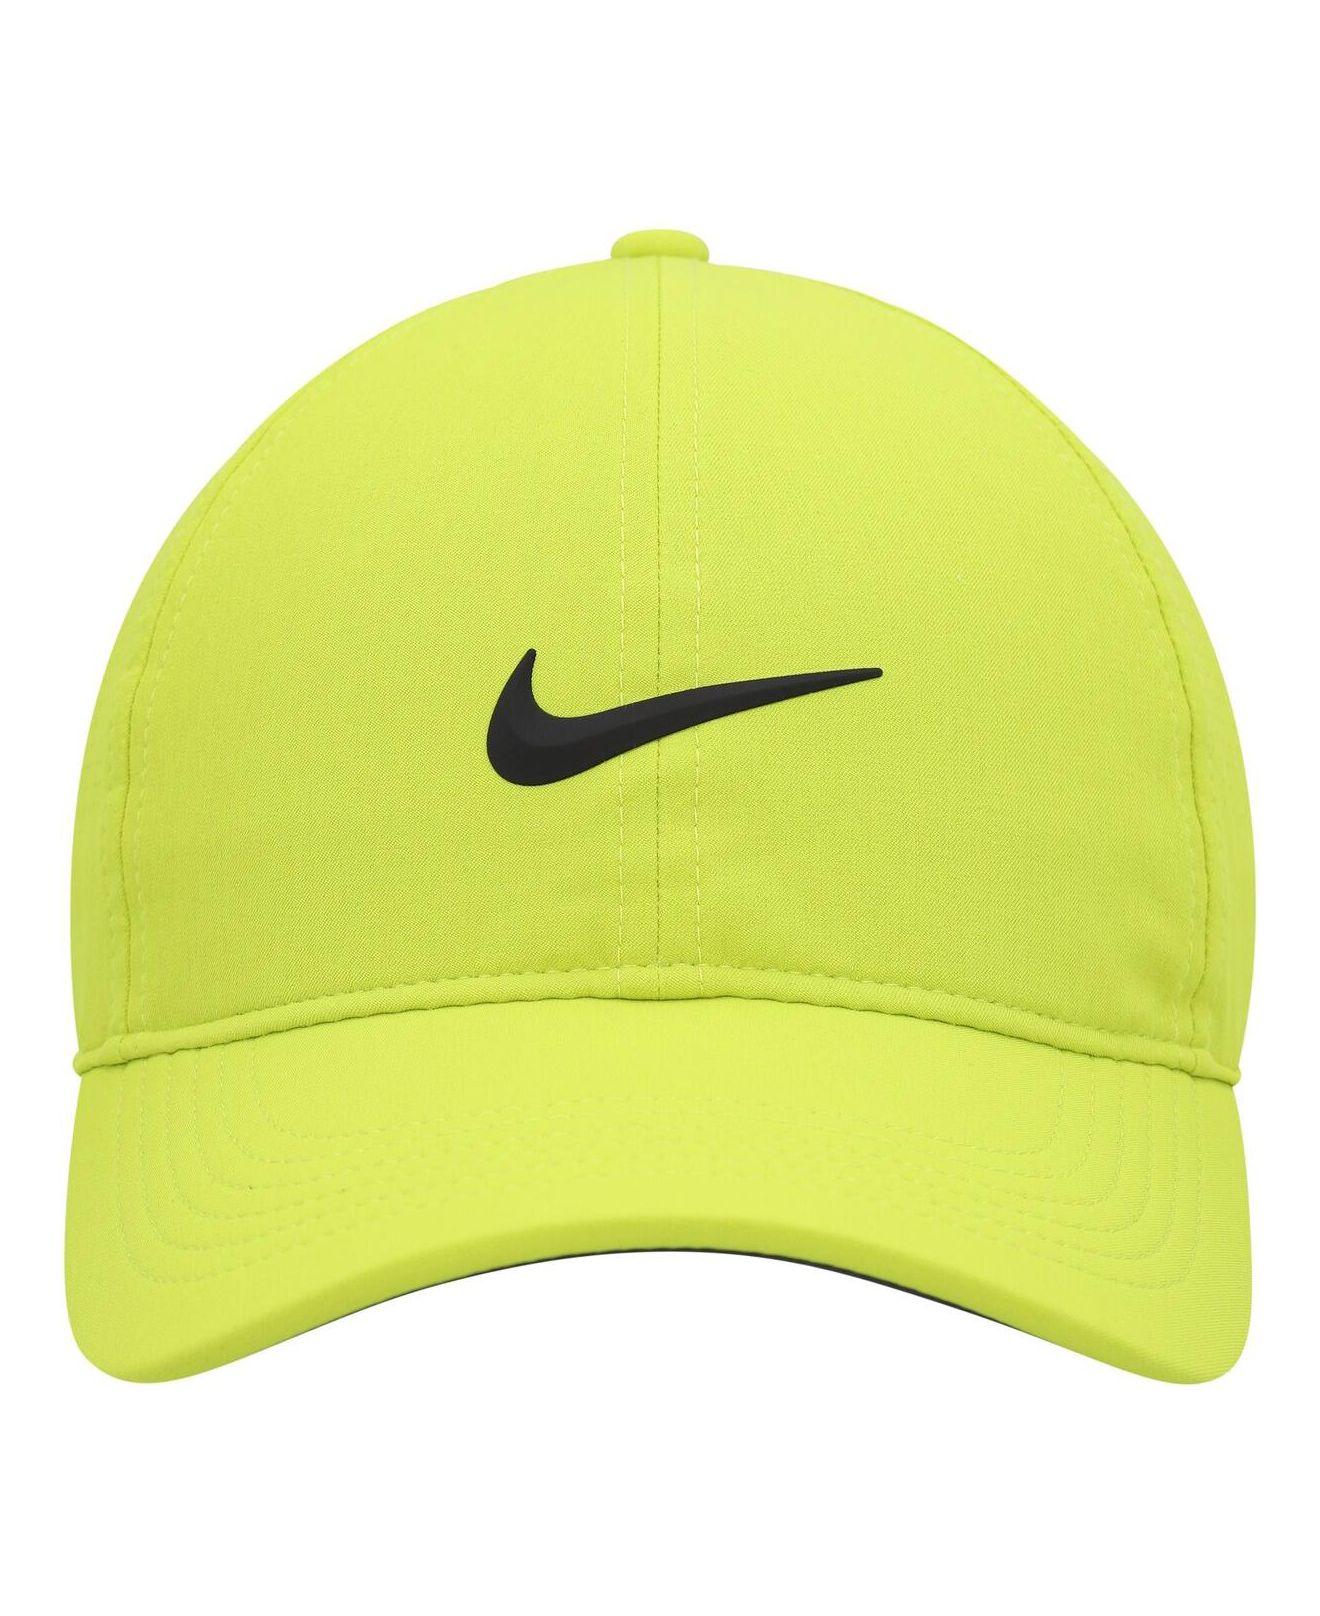 Nike Golf Neon Green Heritage86 Performance Adjustable Hat in Yellow | Lyst